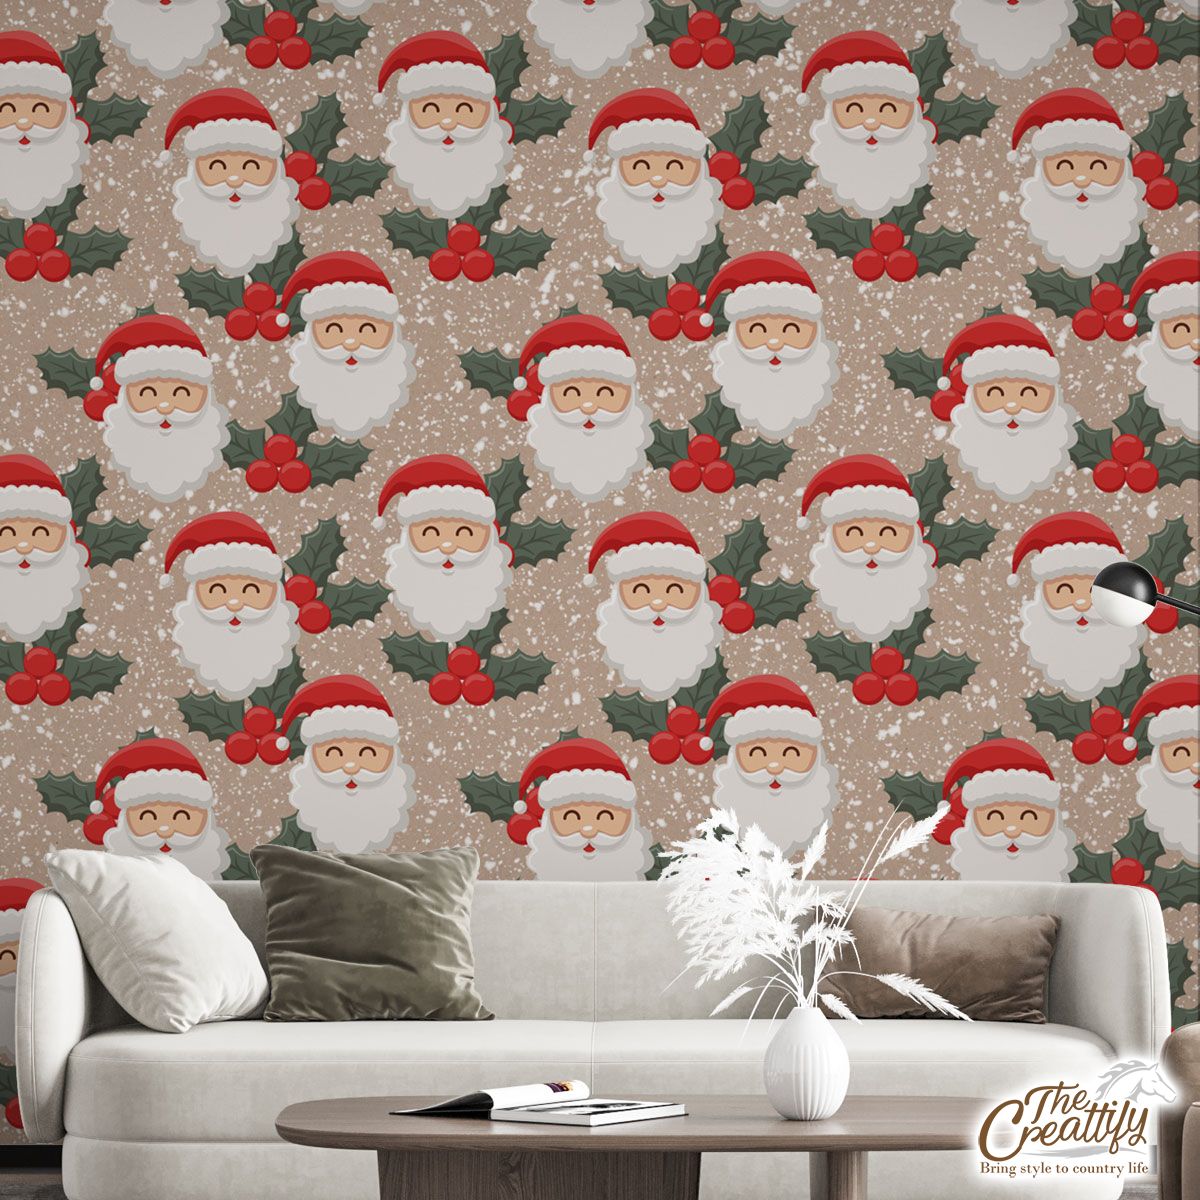 Santa Clause And Holly Leaf On Snowflake Background Wall Mural